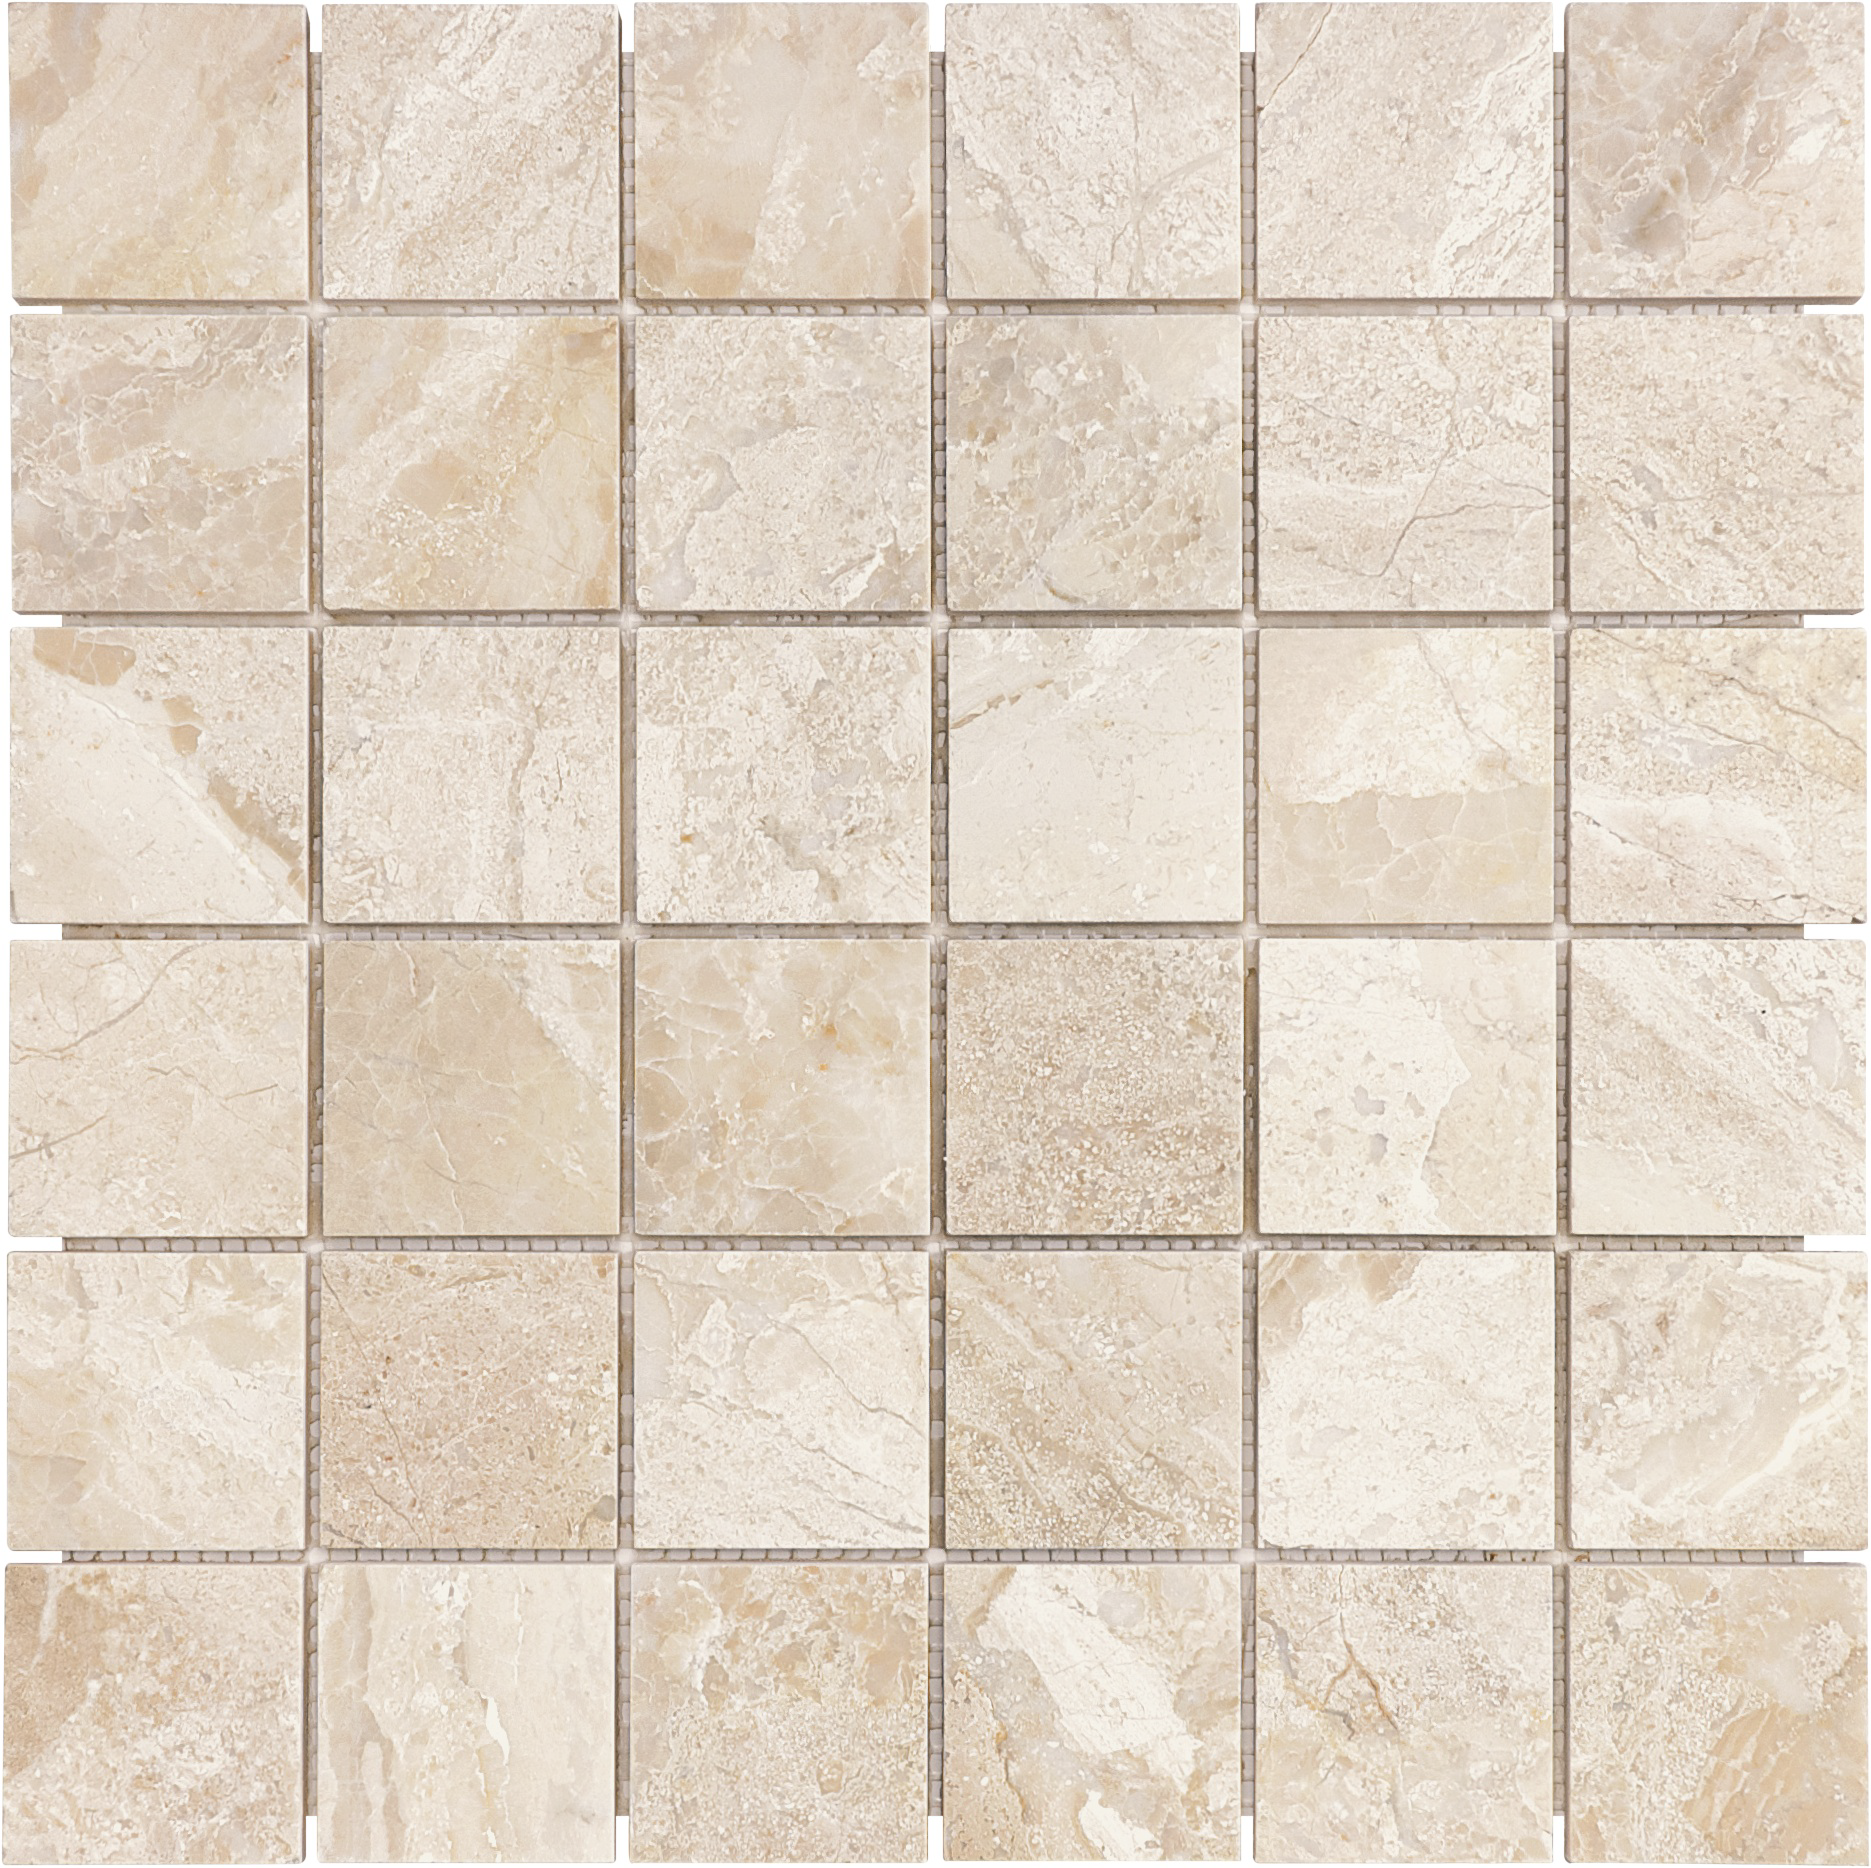 marble straight stack 2x2-inch pattern natural stone mosaic from impero reale anatolia collection distributed by surface group international polished finish straight edge edge mesh shape